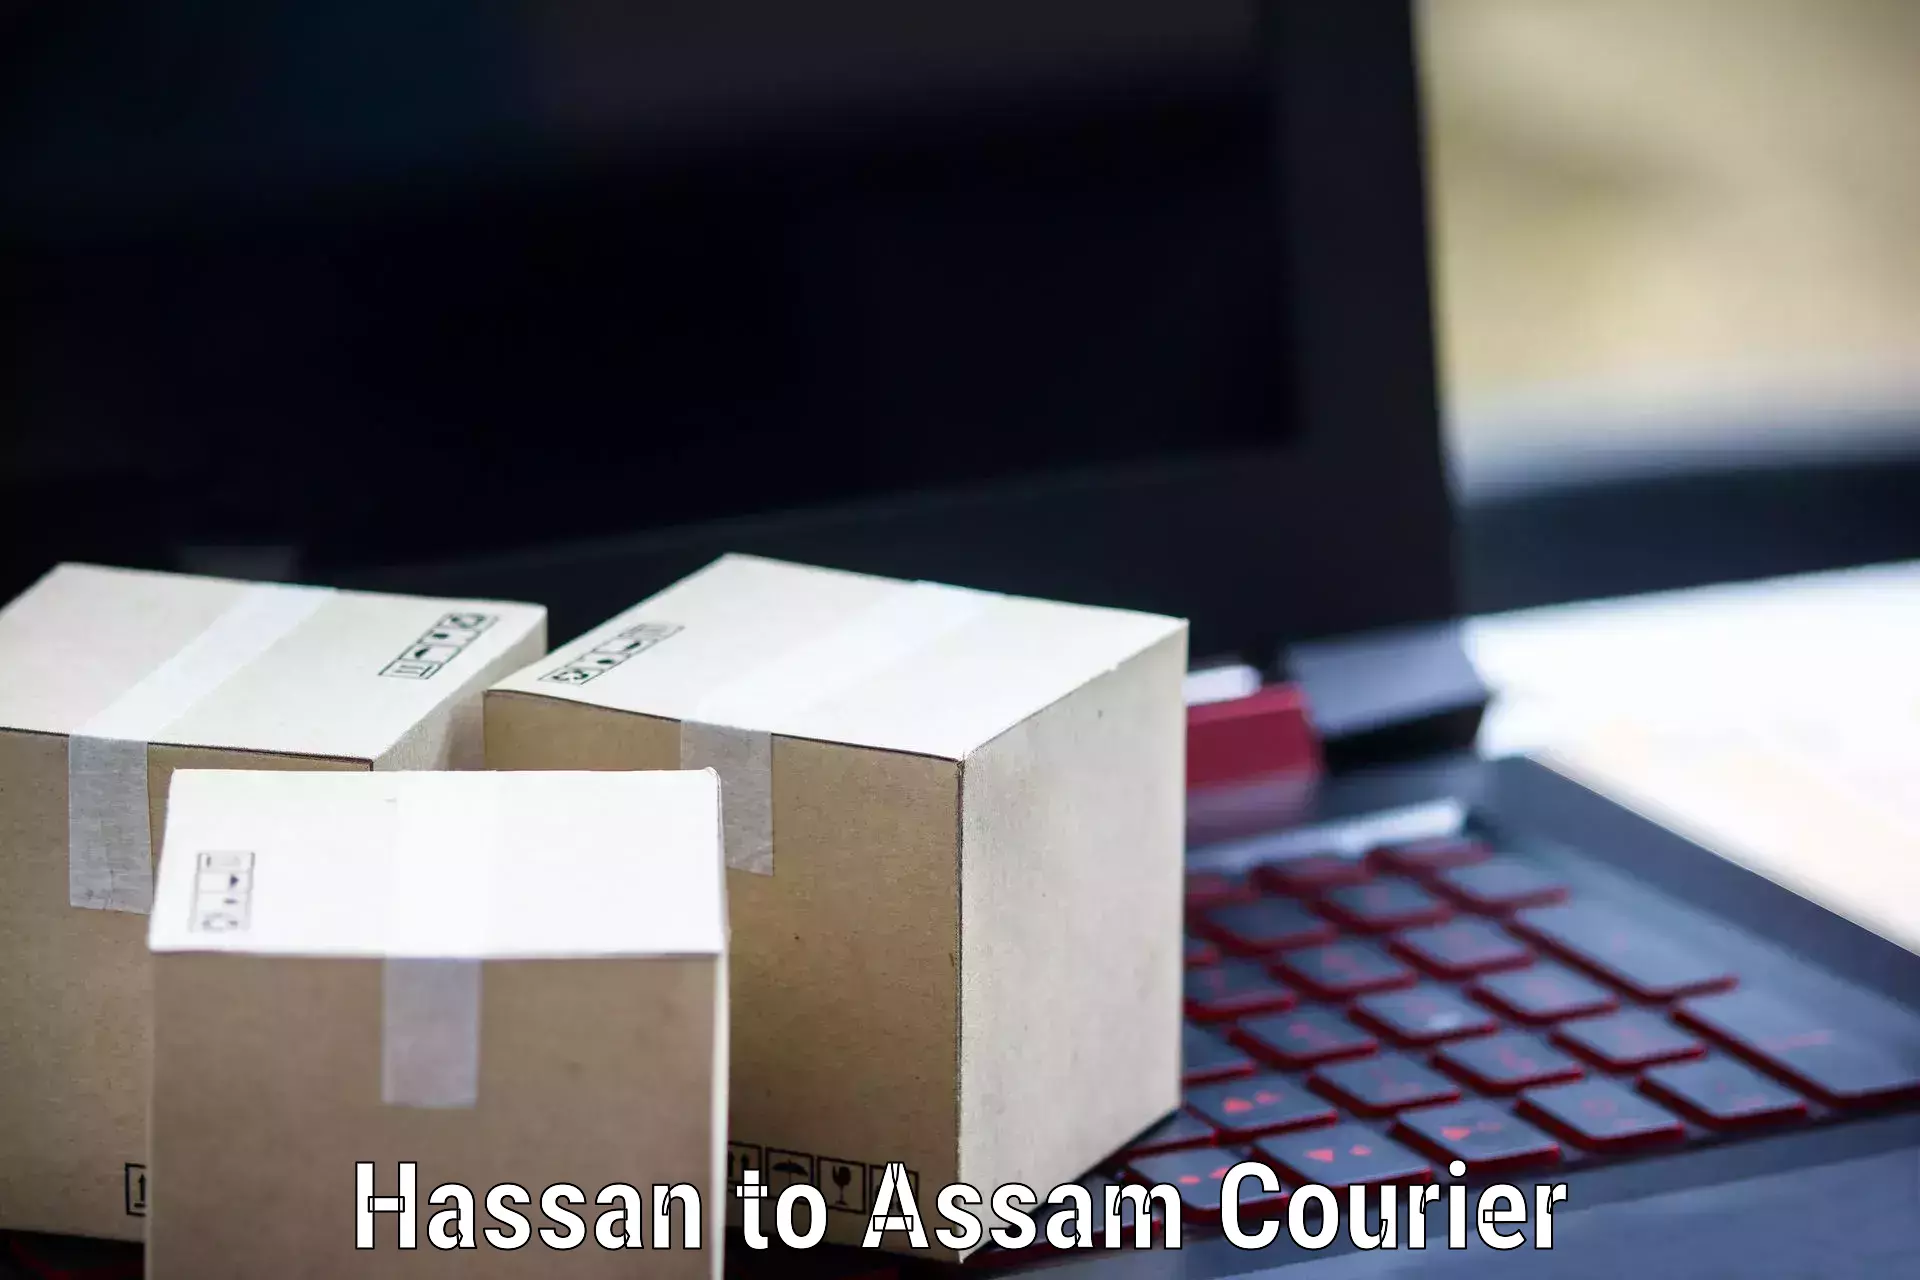 Modern delivery technologies in Hassan to Assam